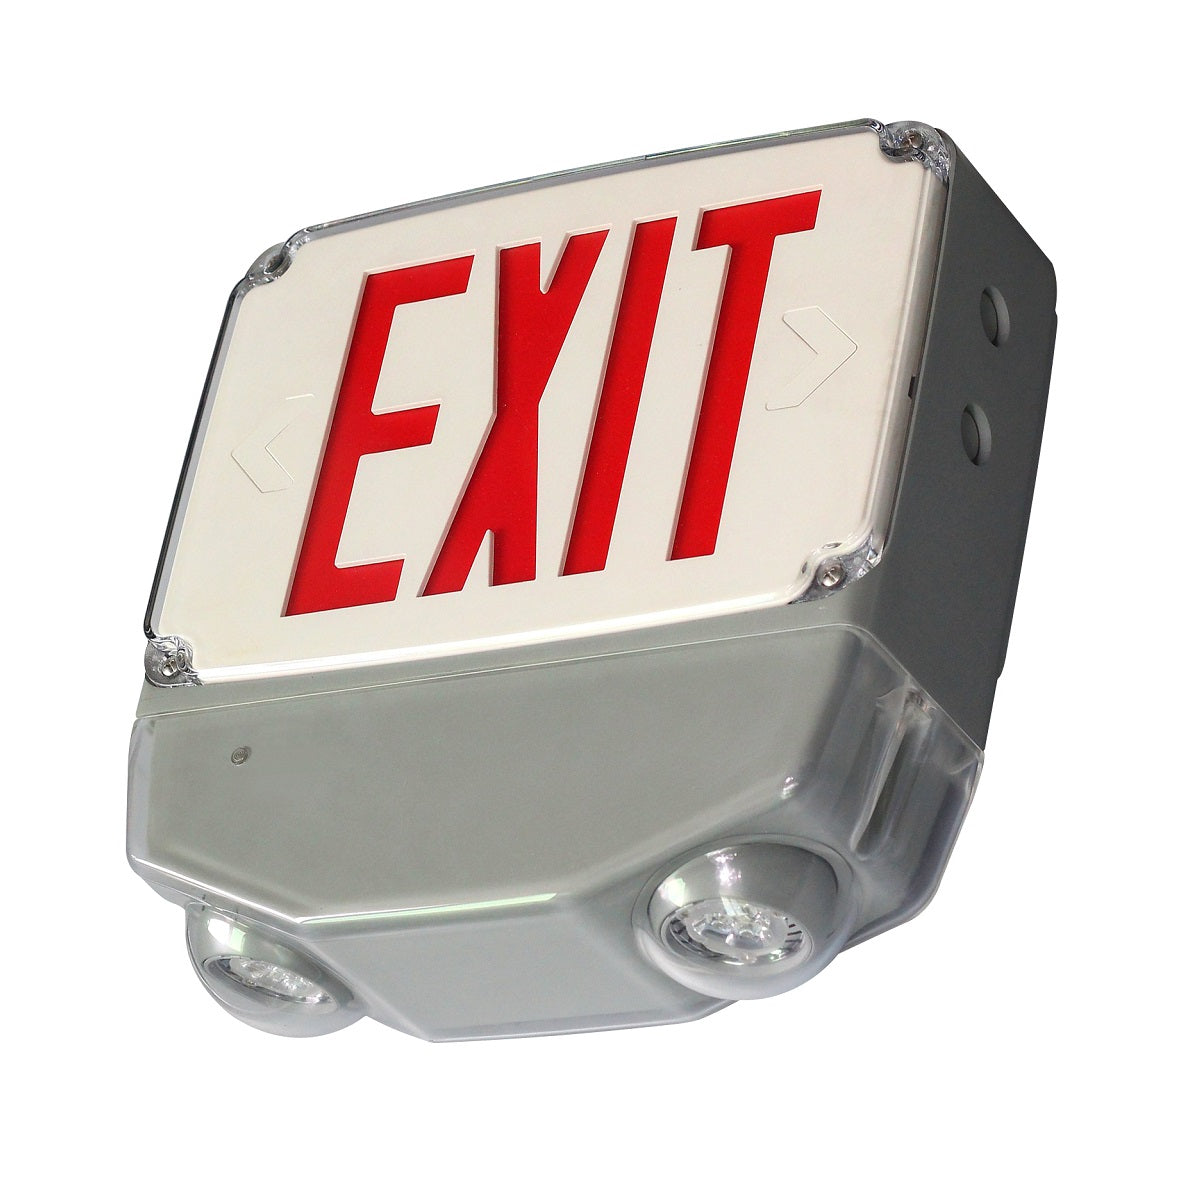 Wet Location All LED Exit/Emergency Combo, Single Face, Red Lettering, White, Black or Gray Housing